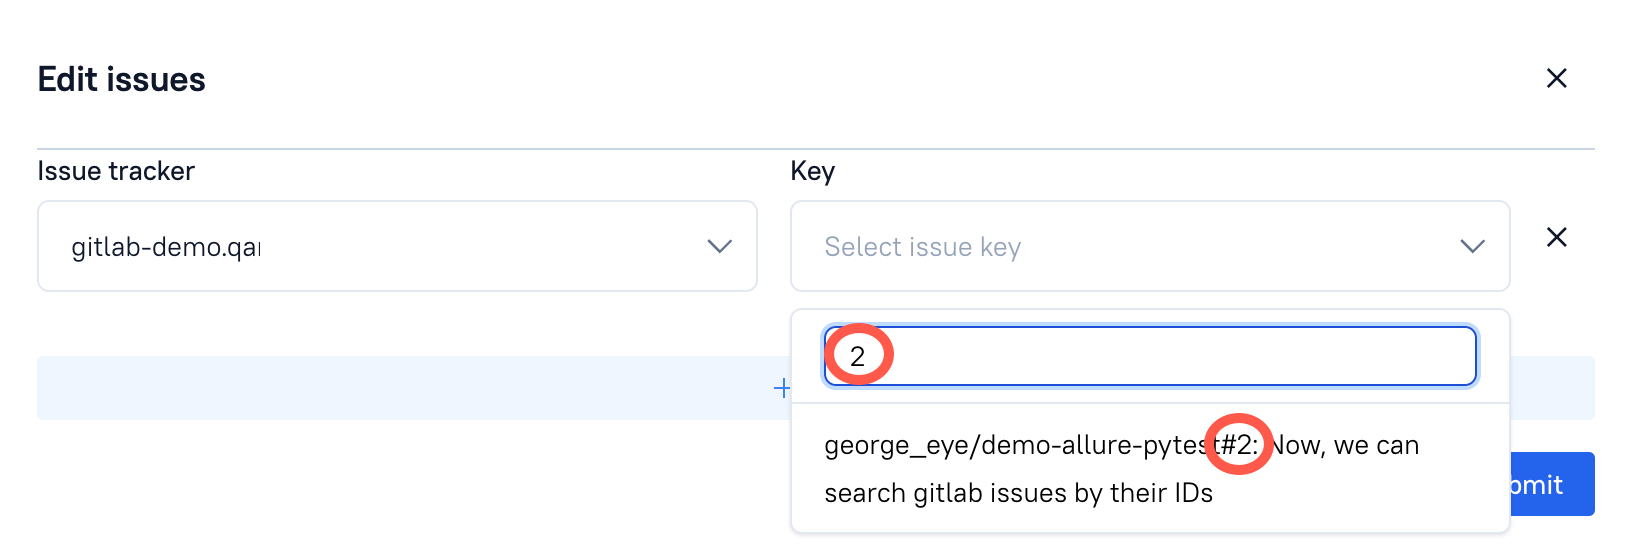 Linking GitLab issues by ID